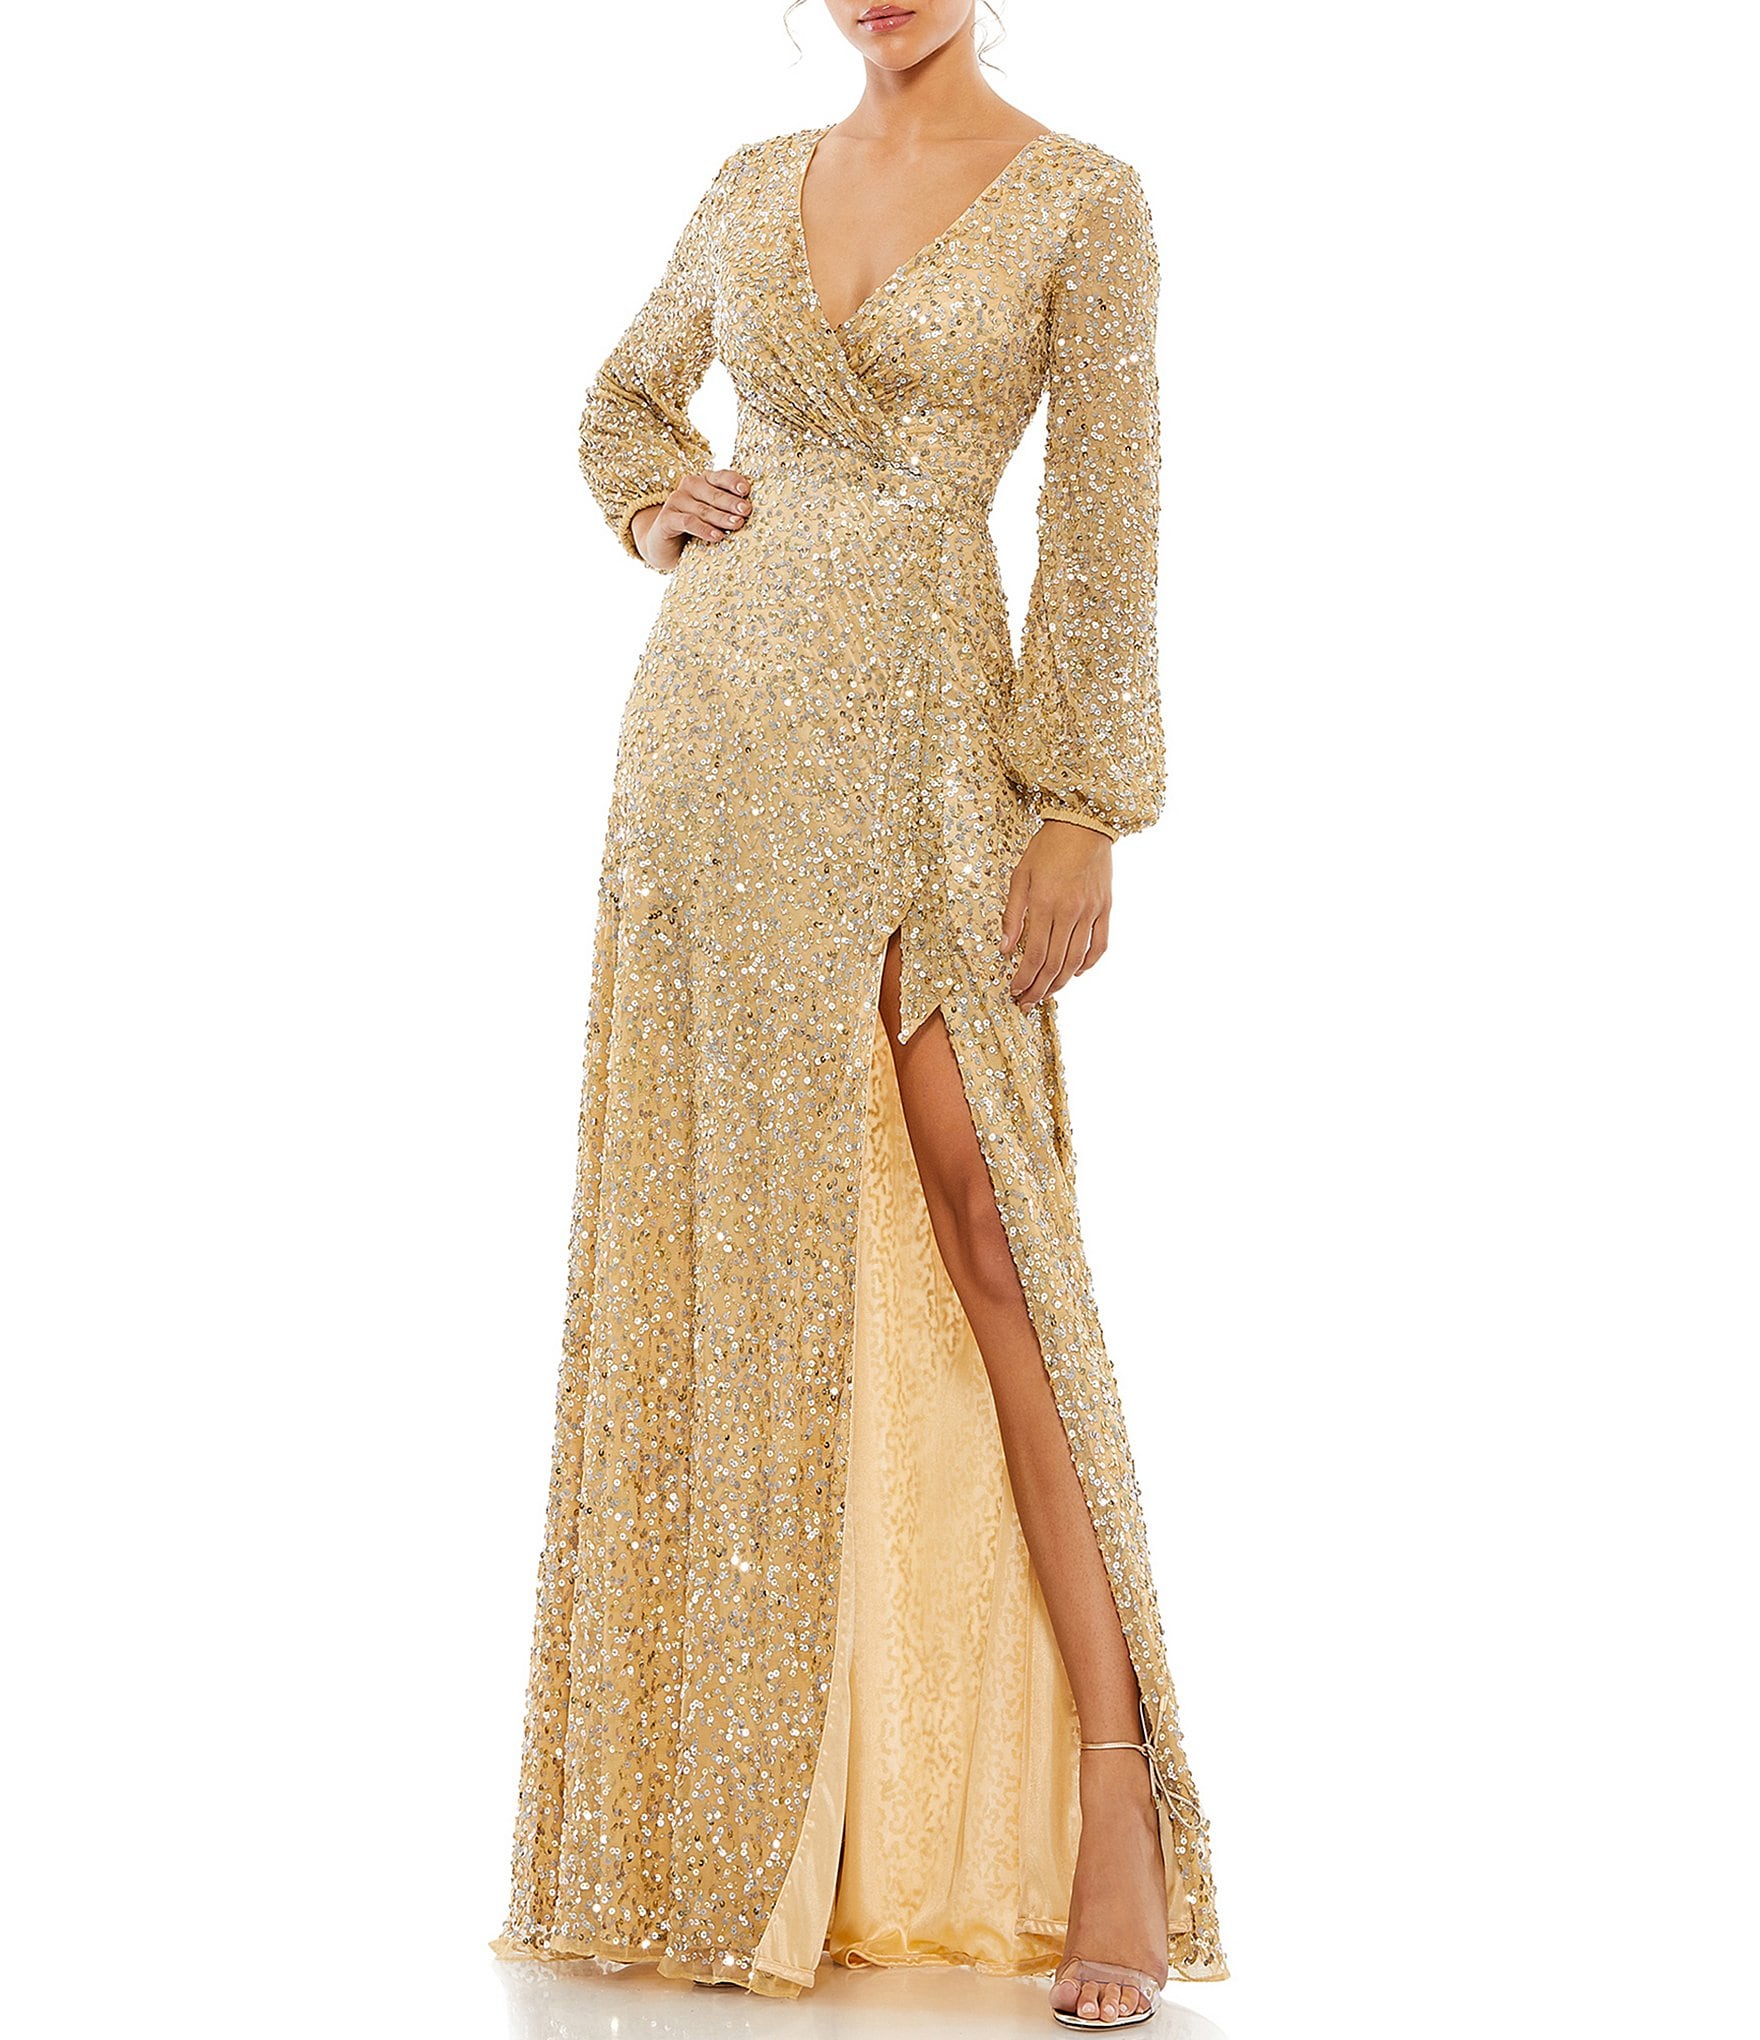 gold sequin ball gown,long gold gown,long sleeve gold midi dress,long sleeve choker neck dress,elegant champagne formal dresses,champagne colored long dress,long golden dress,gold gown,